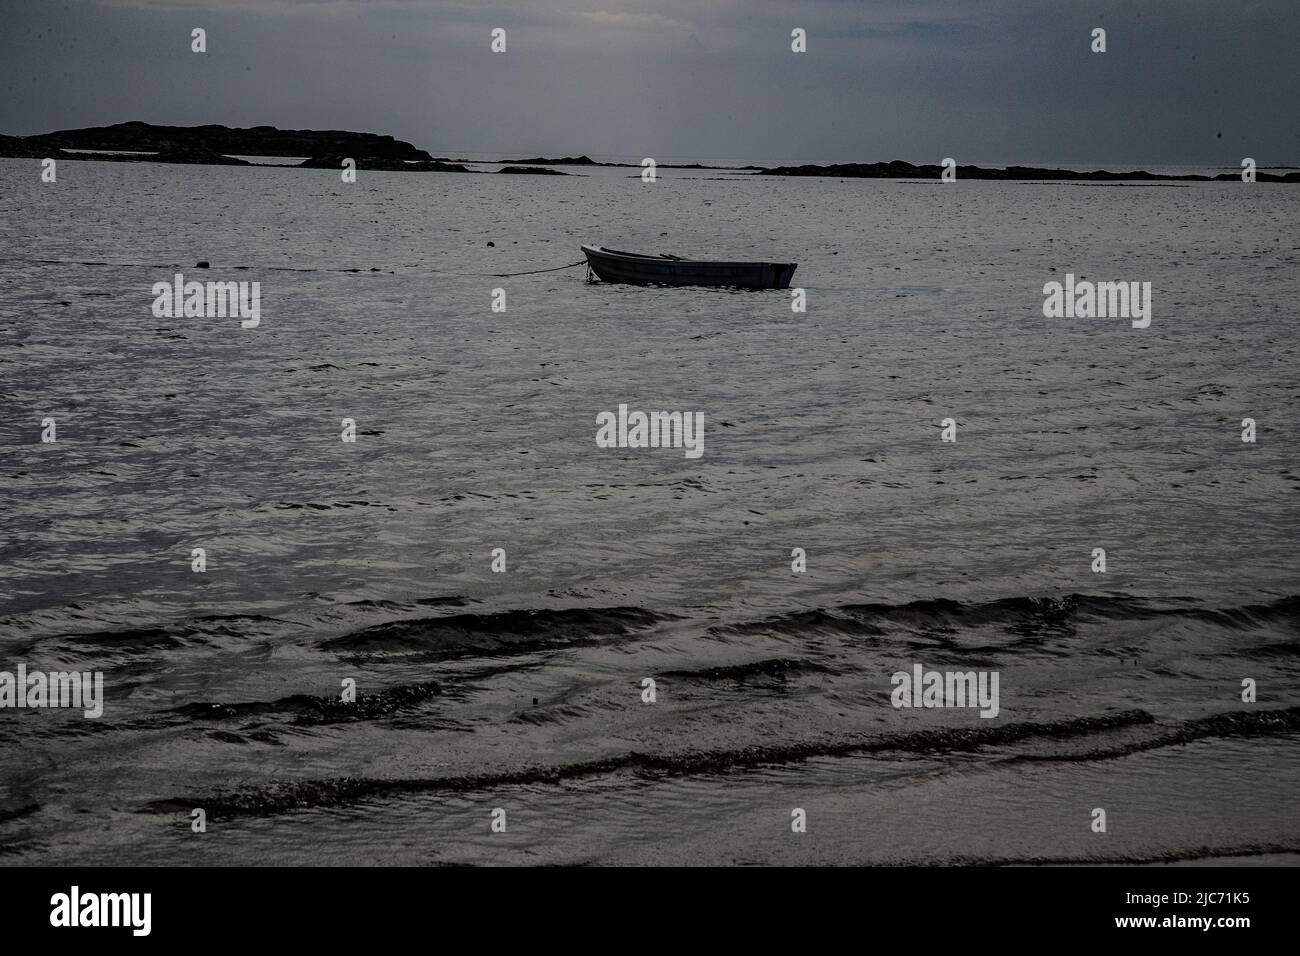 Small dinghy at anchor off the shore of a beach in North Uist, Outer Hebrides as evening falls with adjoining islands visible in the background Stock Photo